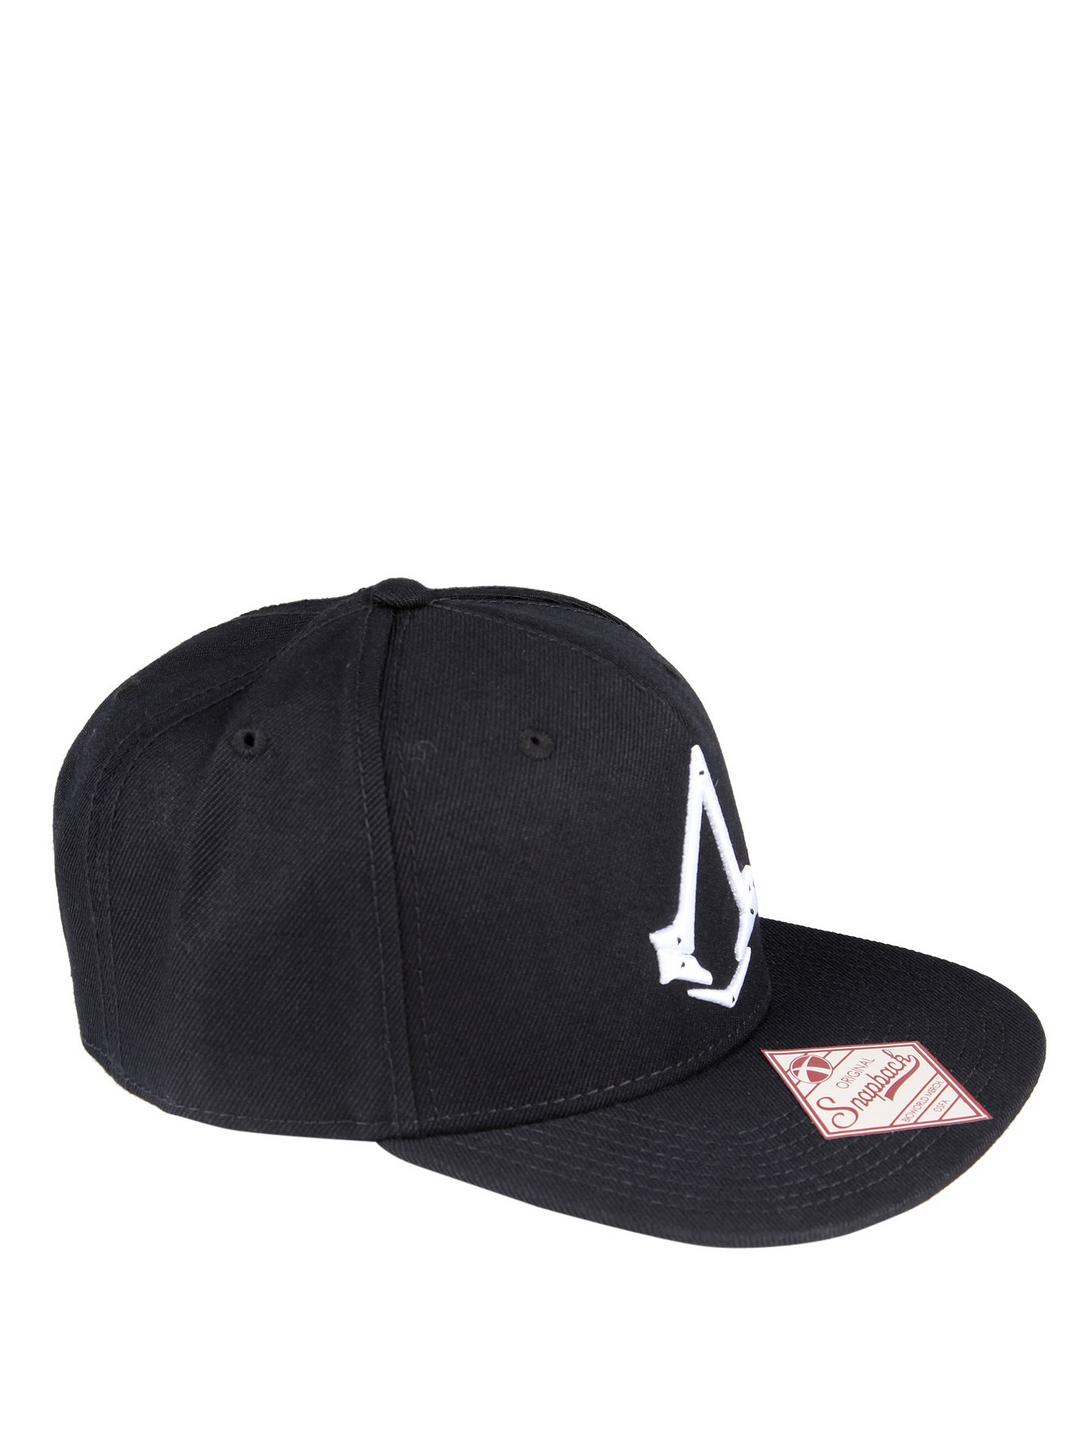 Assassin's Creed Syndicate Snapback Hat, , hi-res